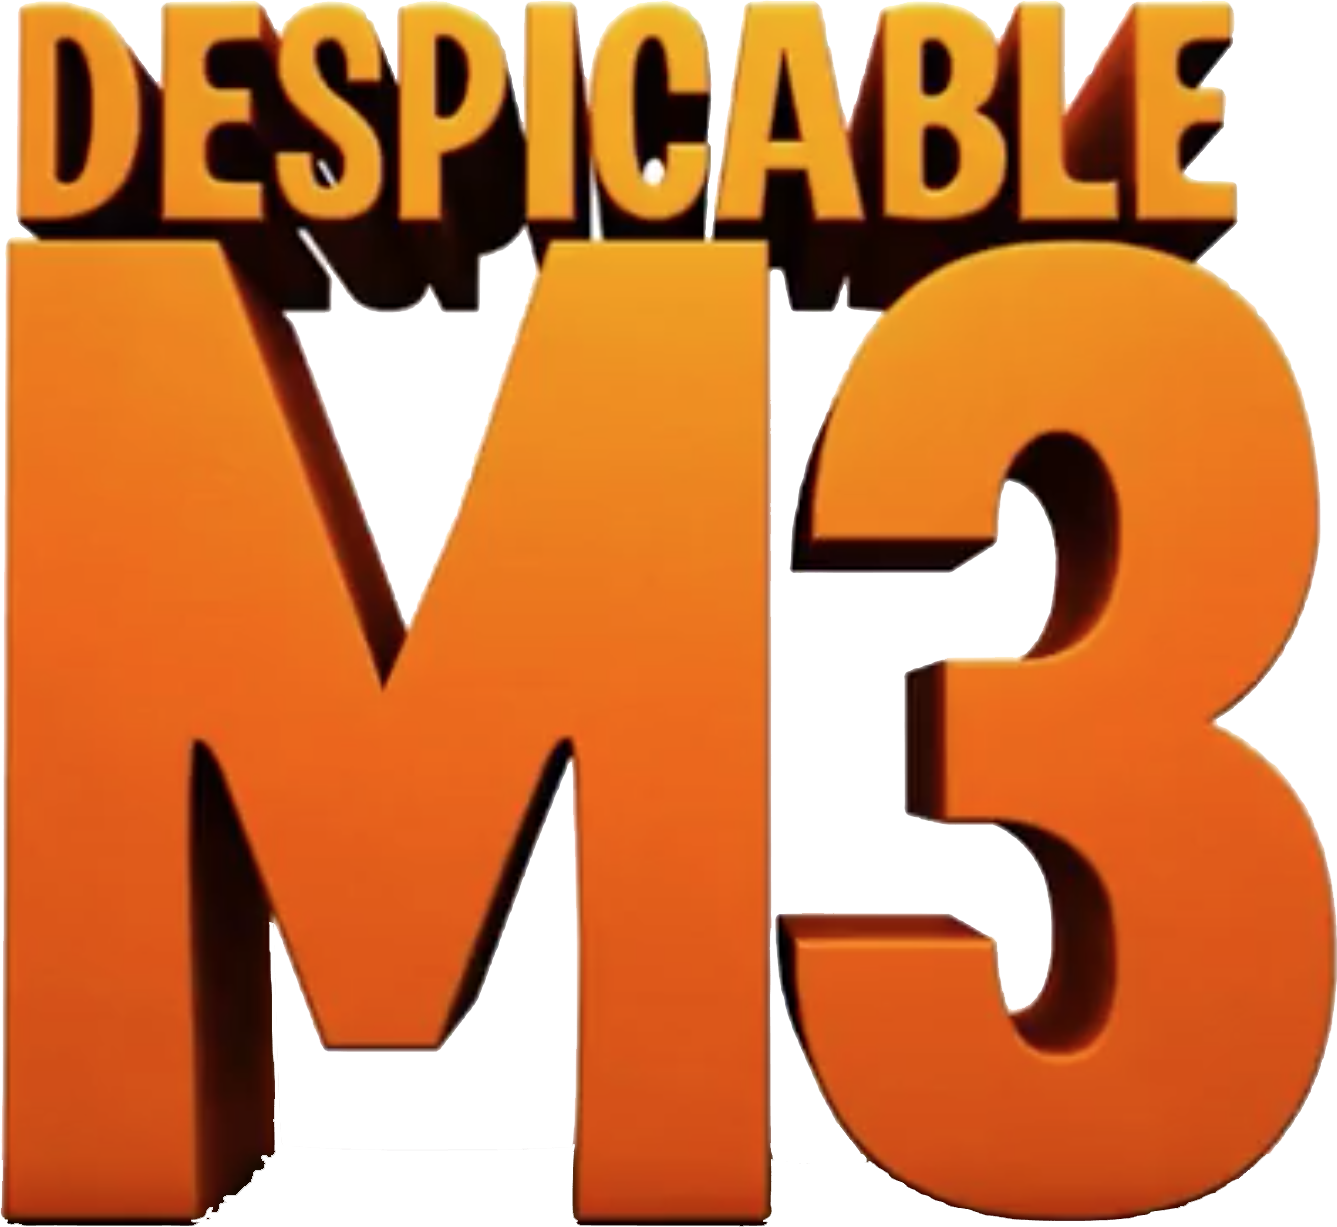 Despicable Me 3 free downloads